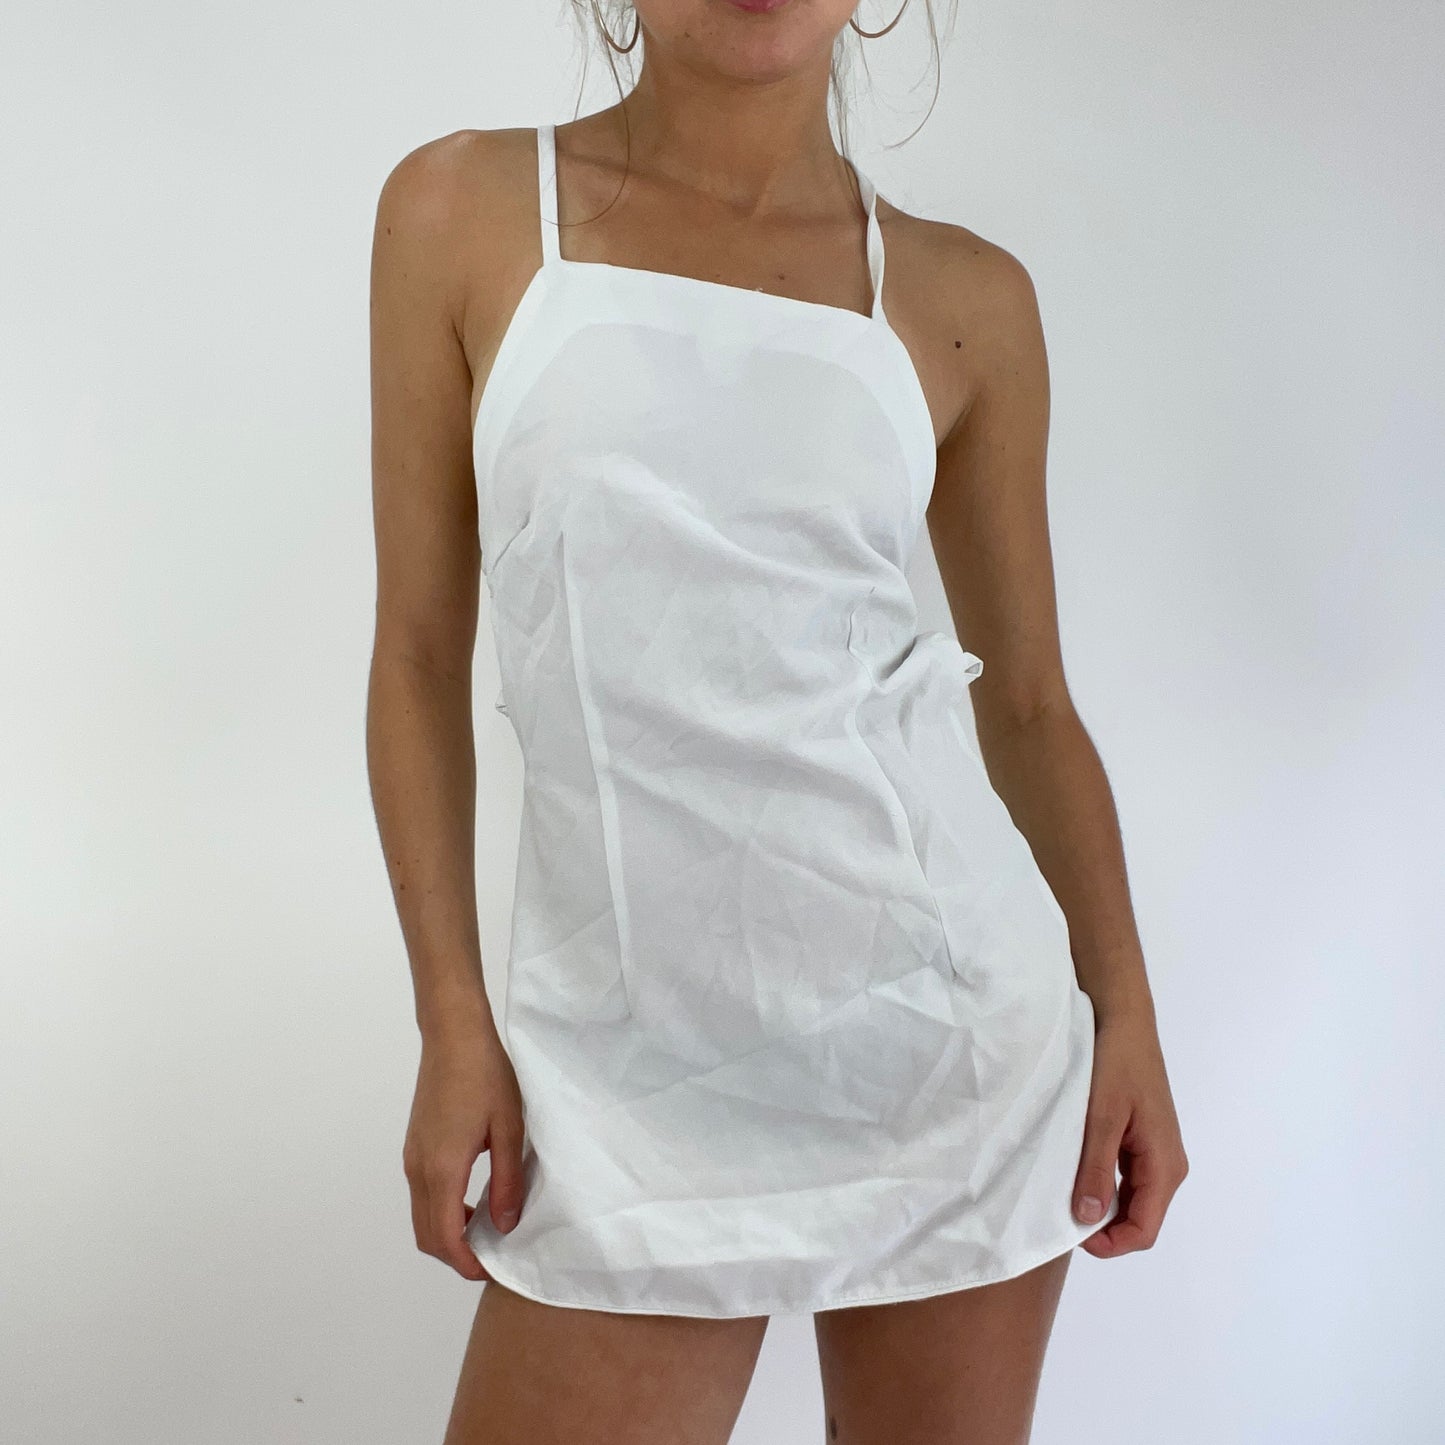 FESTIVAL DROP | white backless top - small